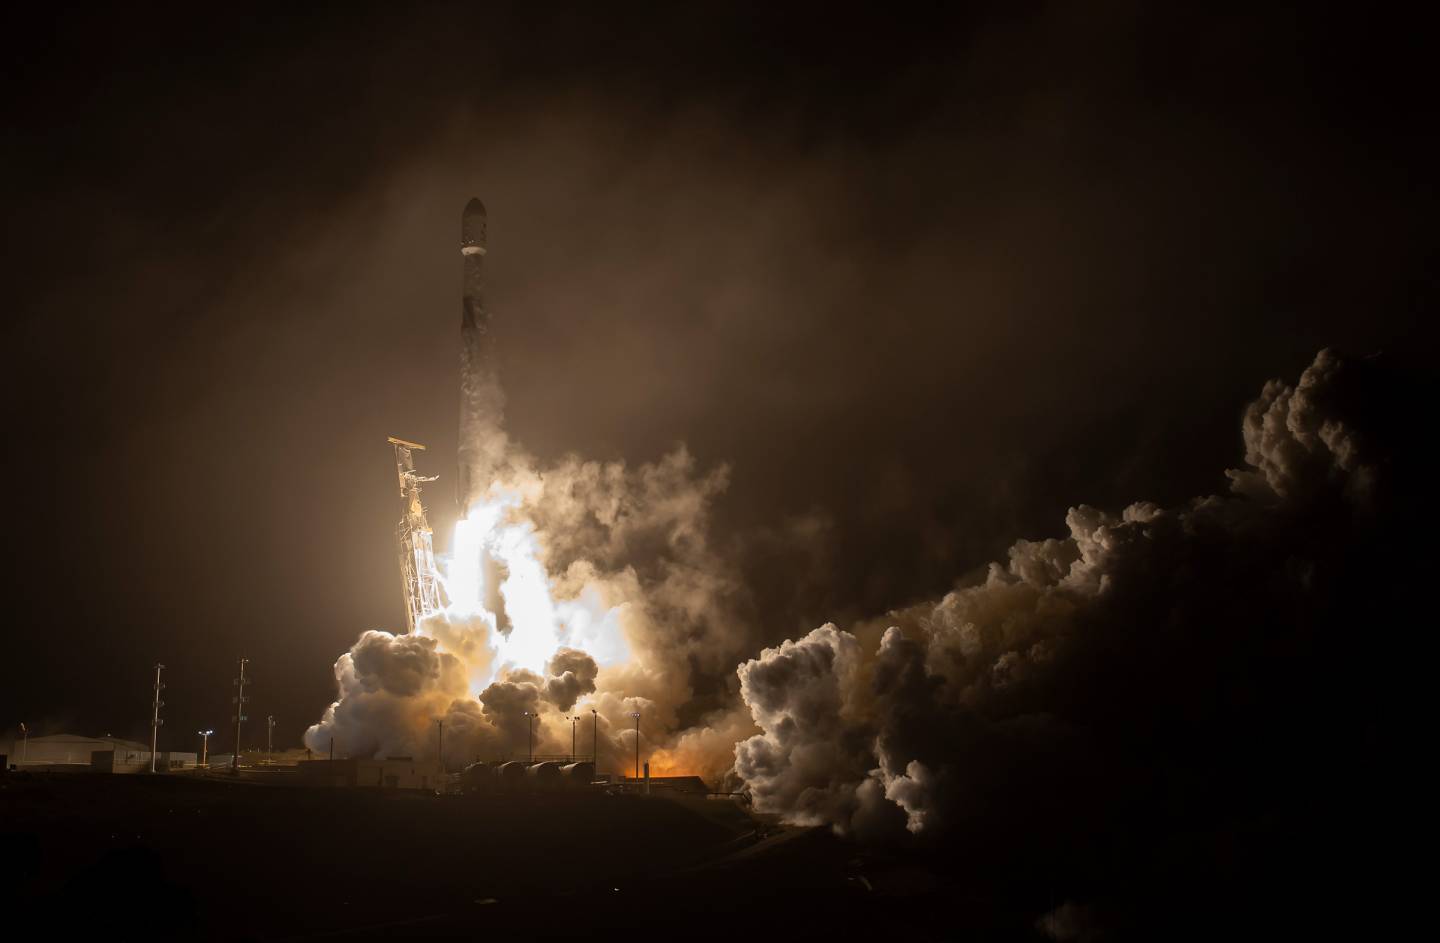 Rocket launches from platform in the dark